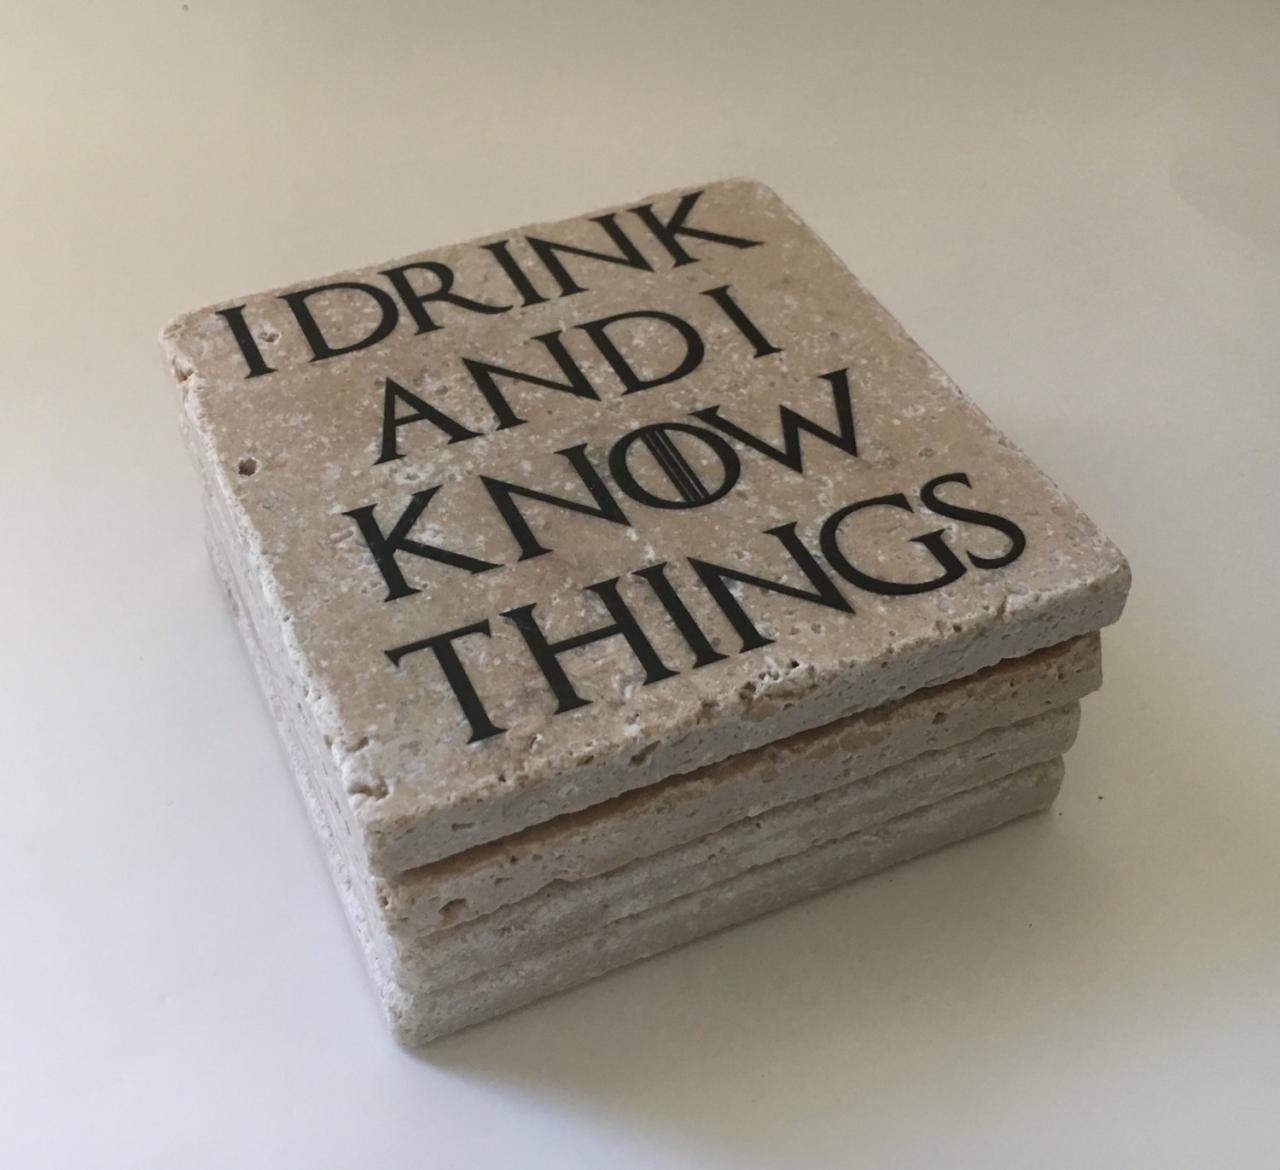 I Drink And I Know Things, Game Of Thrones, Natural Stone Coasters, Set Of 4, Full Cork Bottom, Rustic Decor, Gift